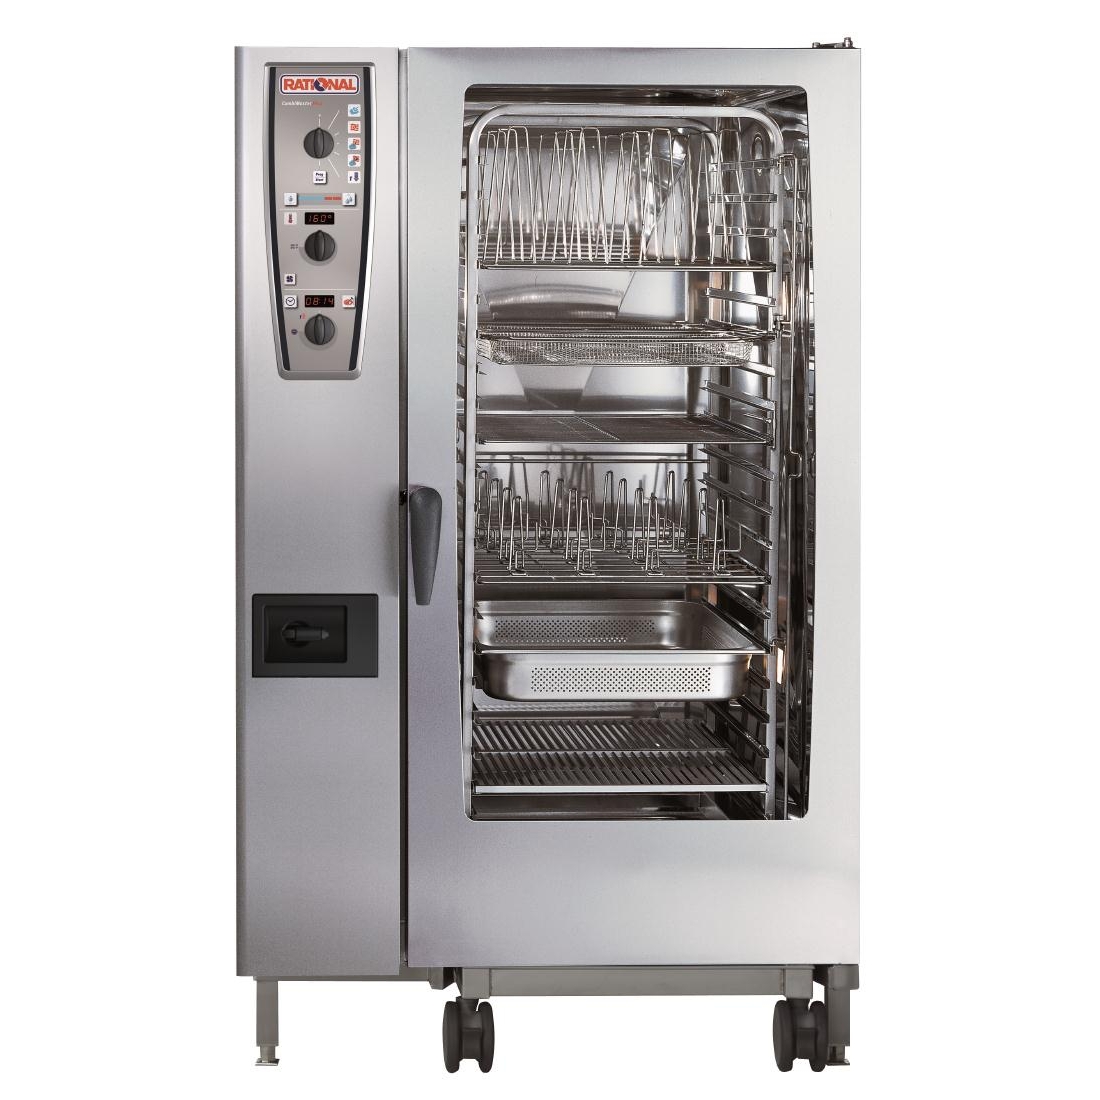 Rational Combimaster Plus Oven 201 Electric